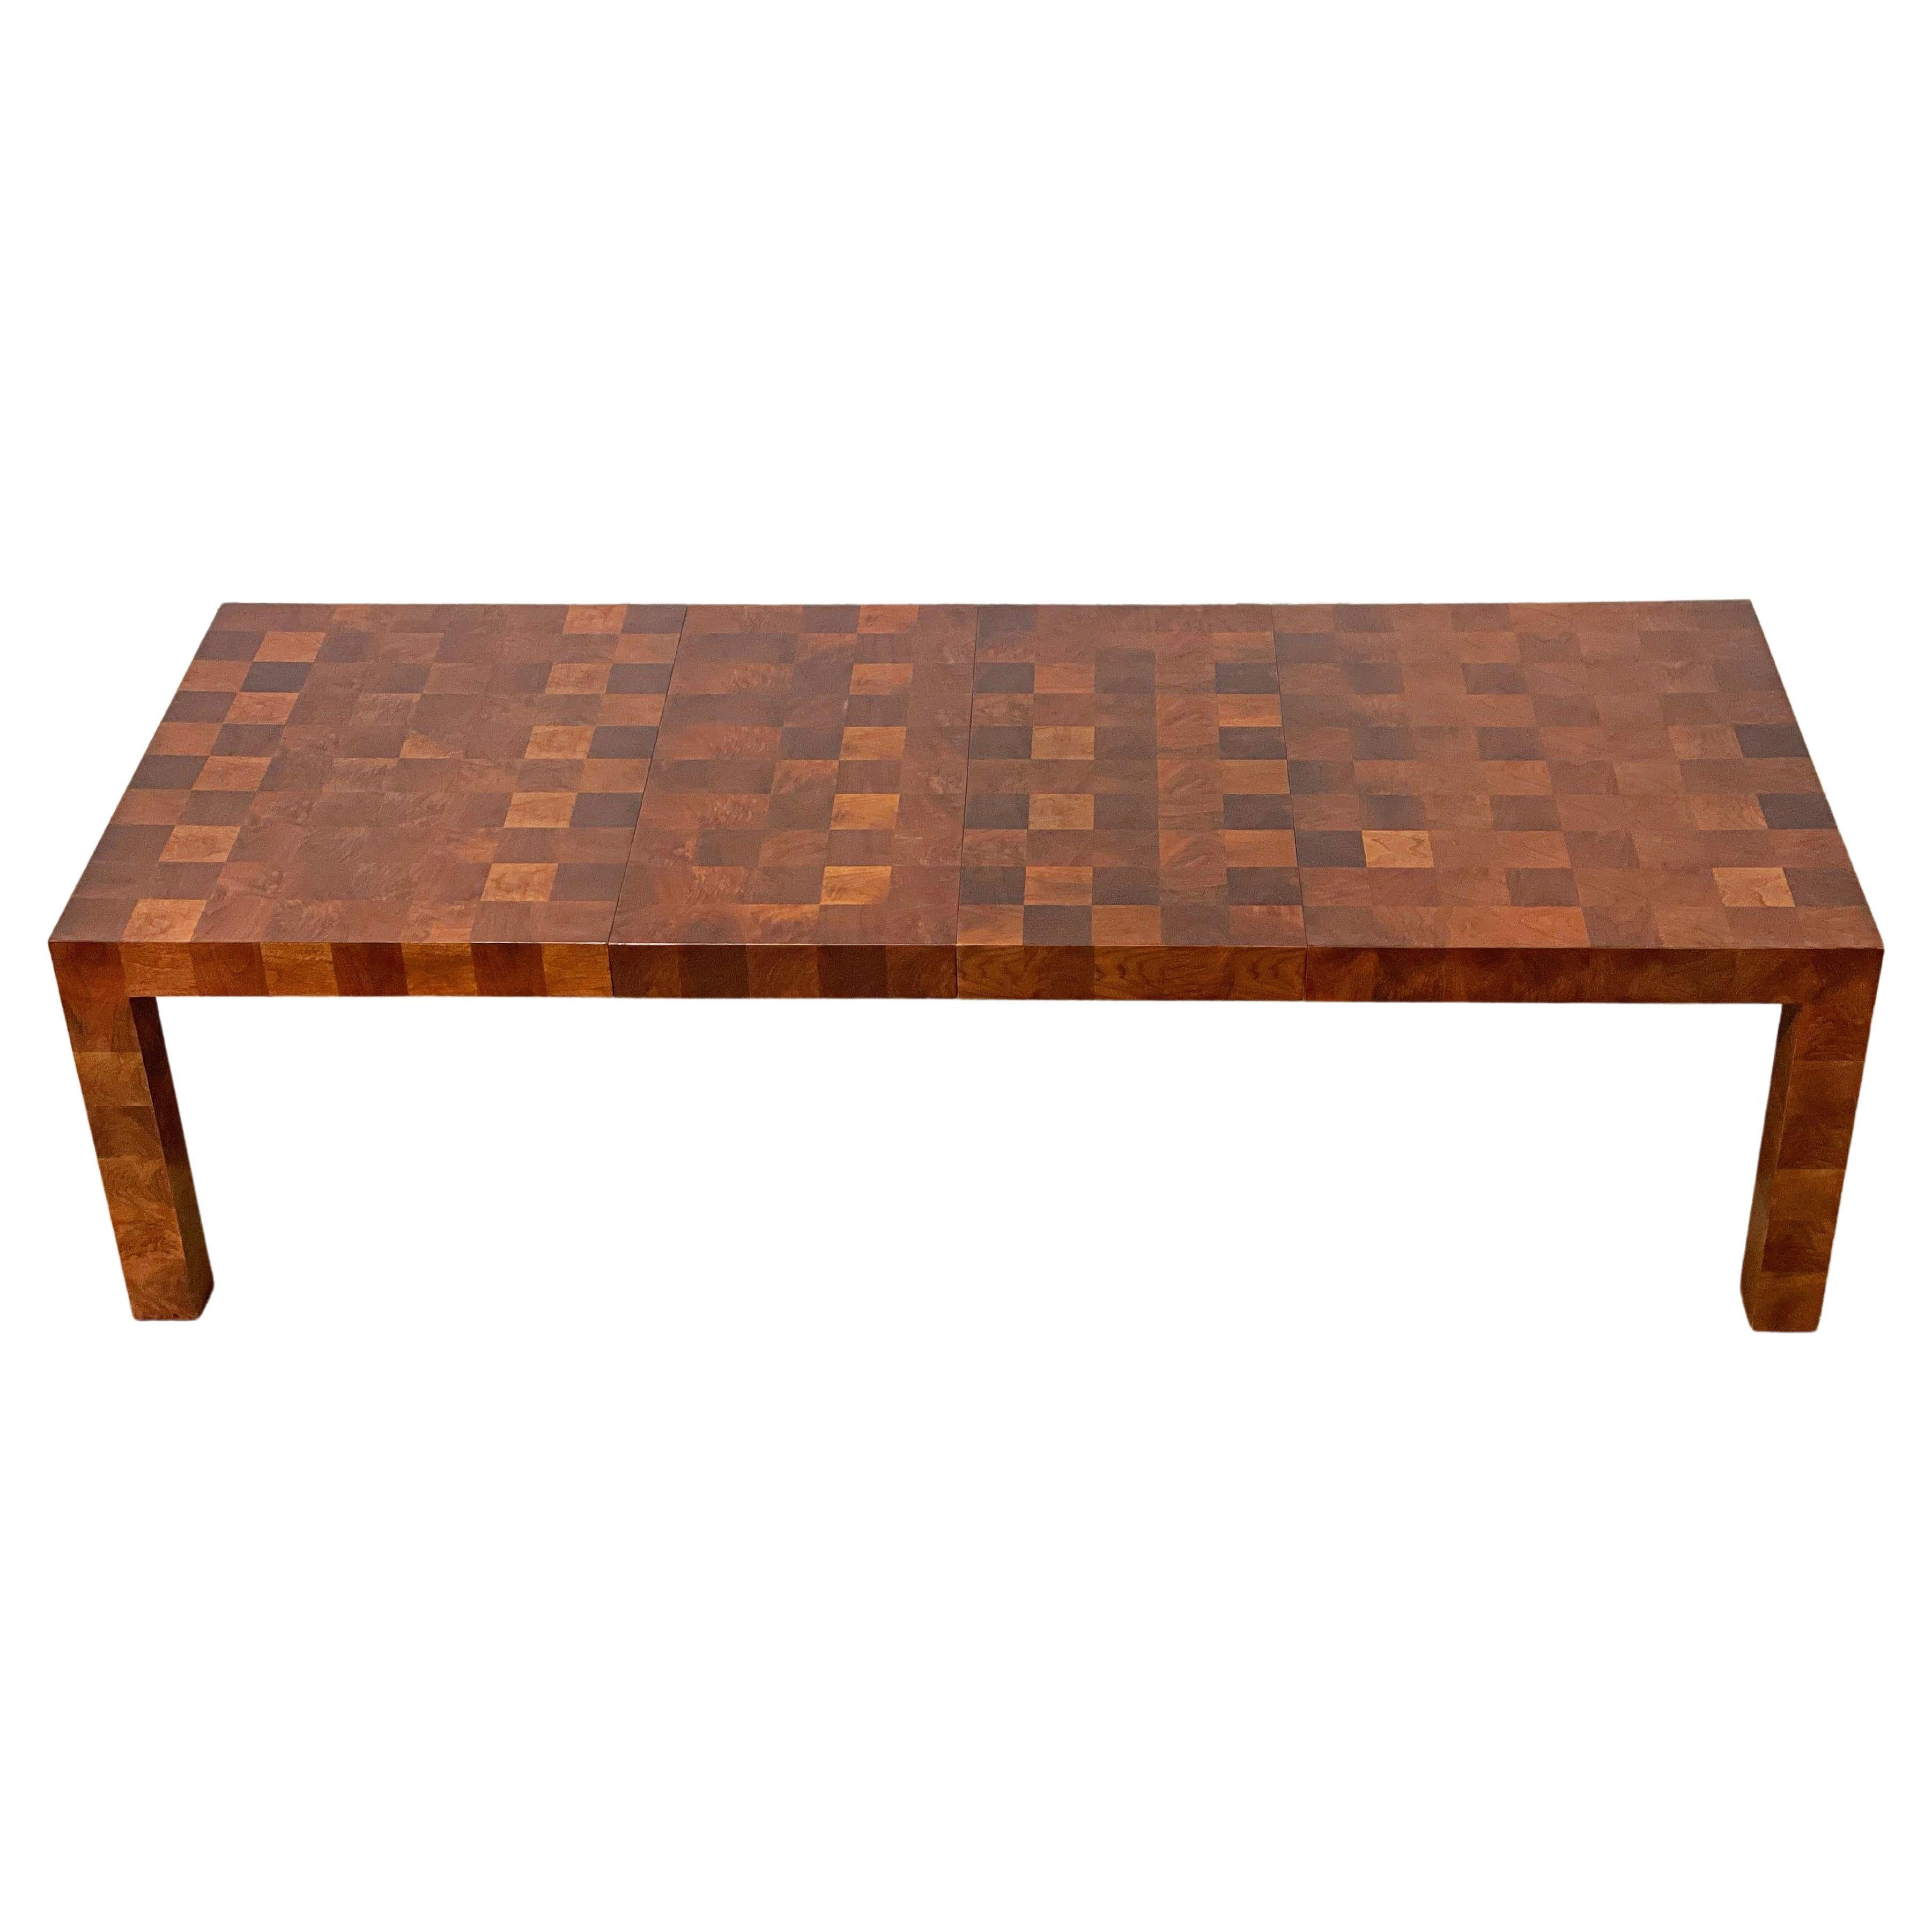 Exceptional patchwork or parquet butt walnut Parsons dining table by Milo Baughman for Thayer Coggin - Model 3527. Stunning in person and commands attention - sure to be the statement piece to anchor a room. 